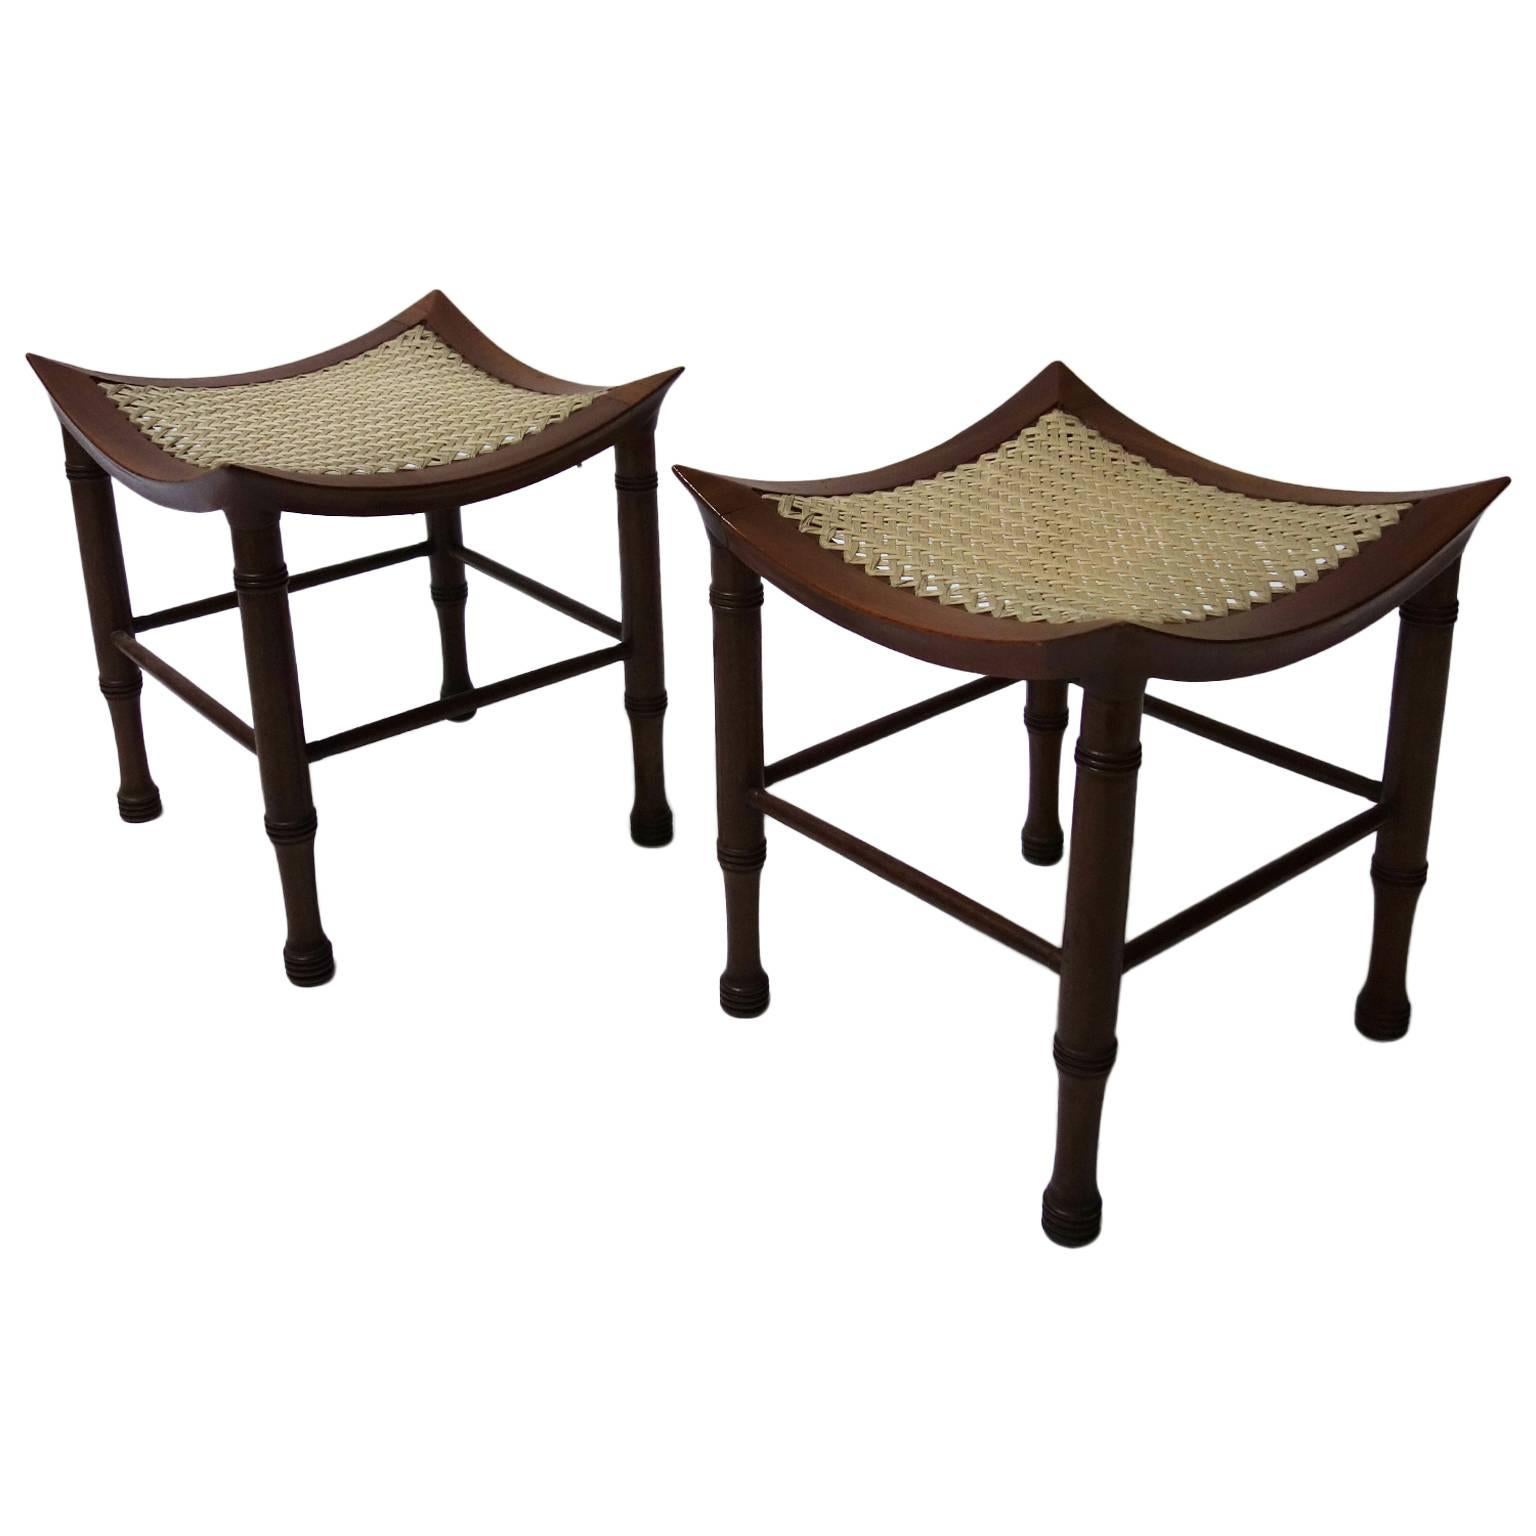 Pair of Arts & Crafts 'Thebes' Stools by Liberty & Co